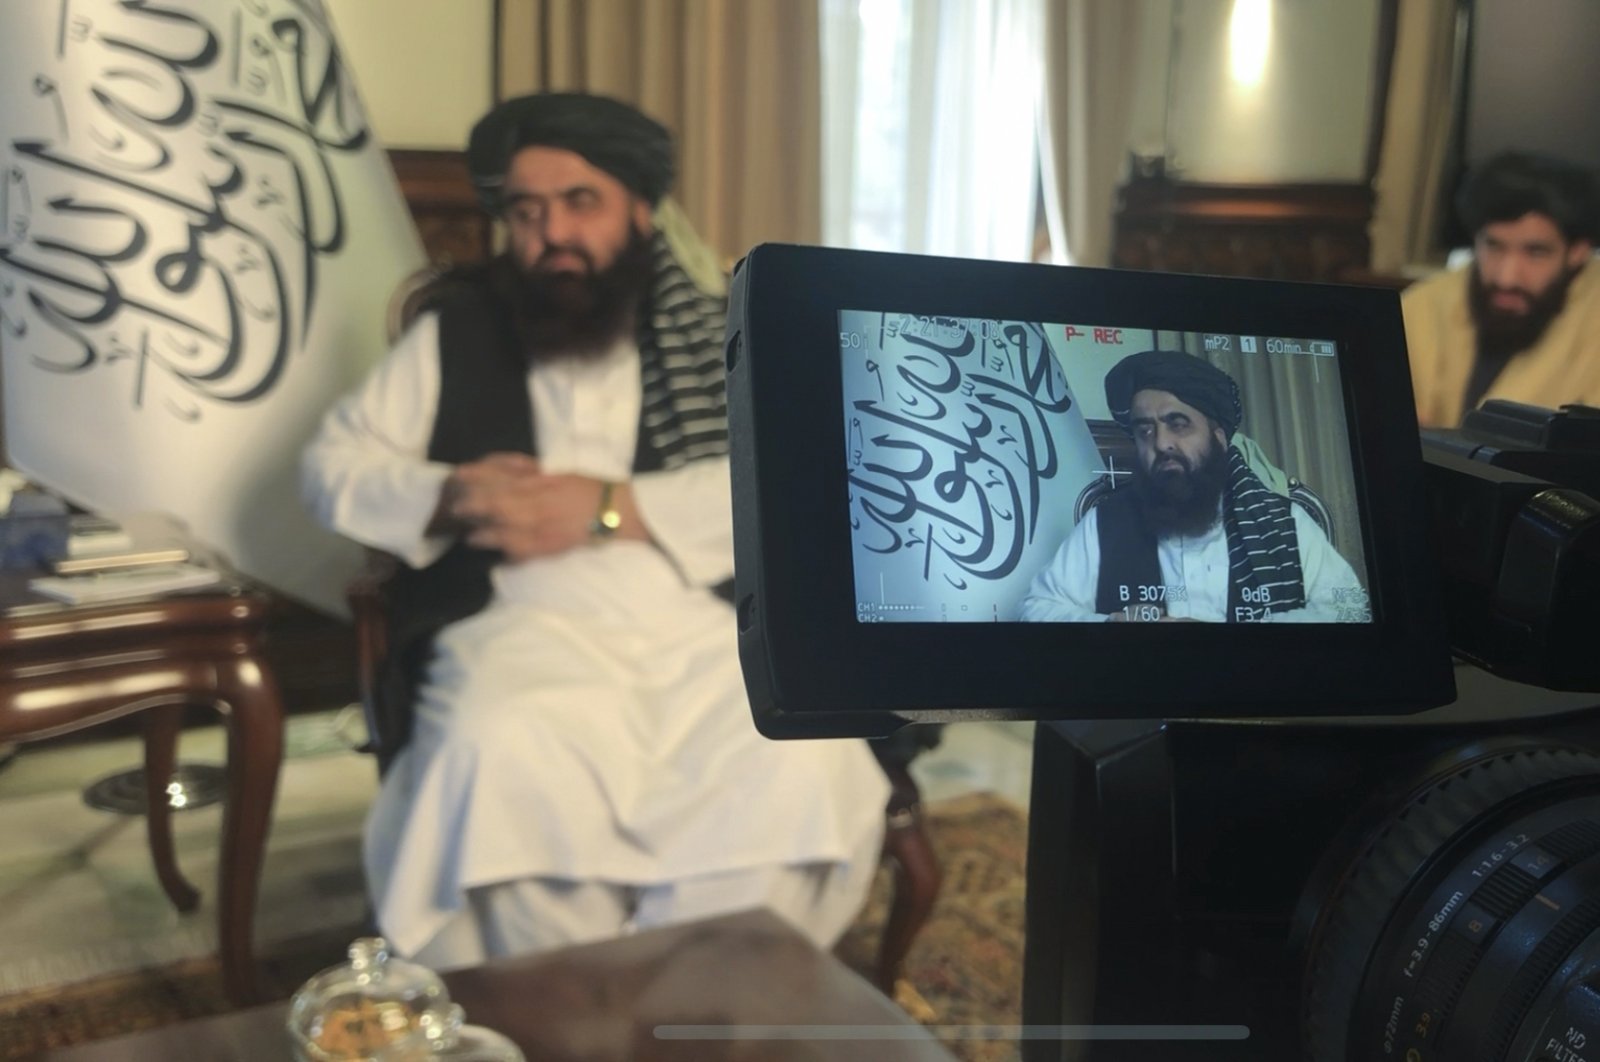 The foreign minister in Afghanistan&#039;s new Taliban-run Cabinet, Amir Khan Muttaqi speaks during an interview in Kabul, Afghanistan, Dec. 12, 2021. (AP Photo)